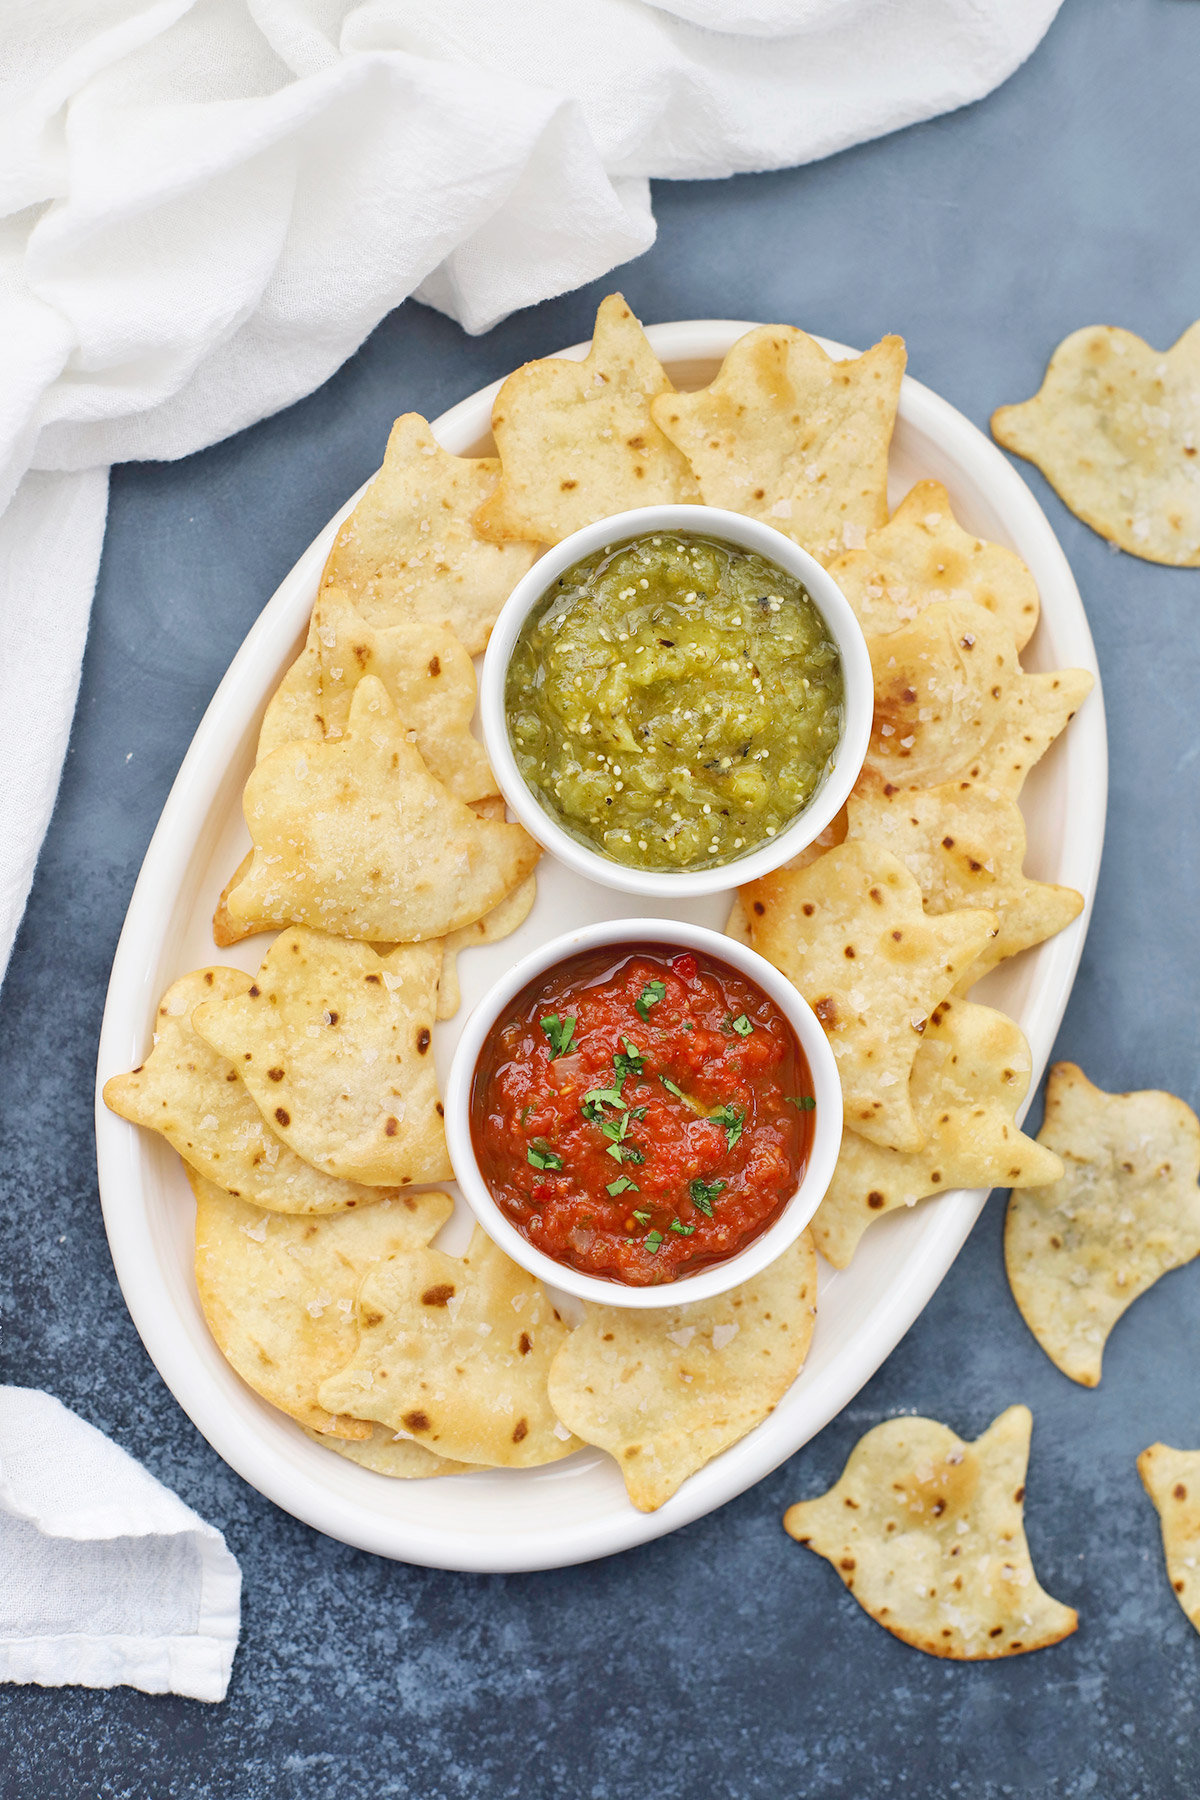 Baked Ghost Chips on a platter with bowls of red and green salsa